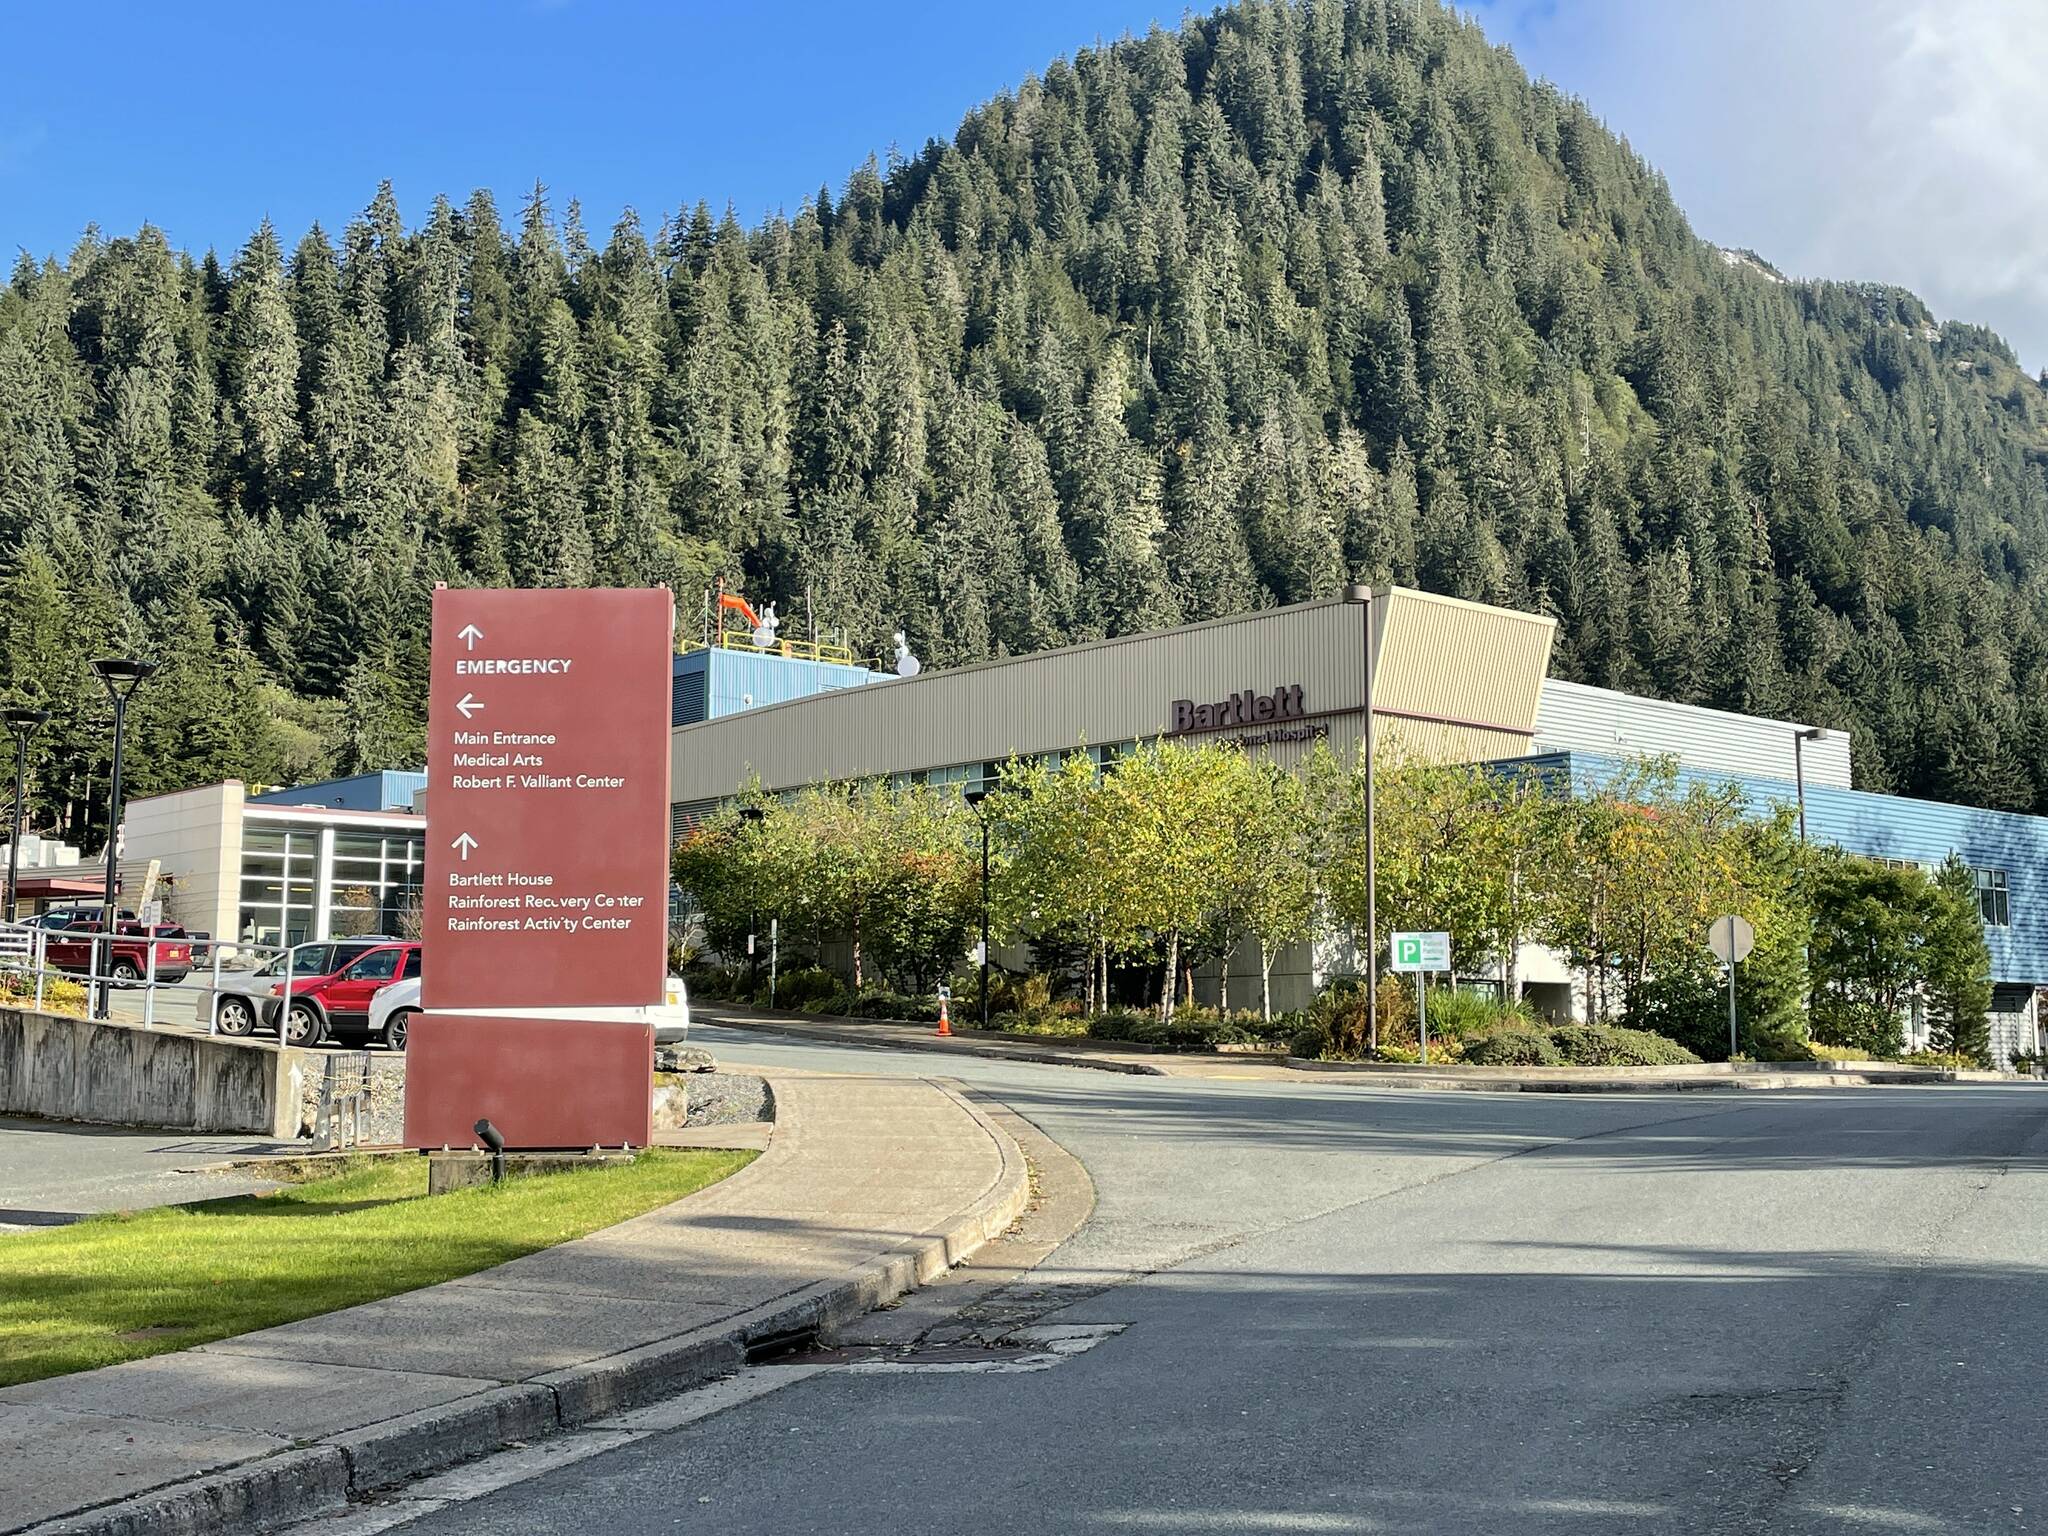 Bartlett Regional Hospital will no longer require masking in its facilities along with a change in its pre-procedure testing policies, the hospital announced in a recent news release. (Michael S. Lockett / Juneau Empire)